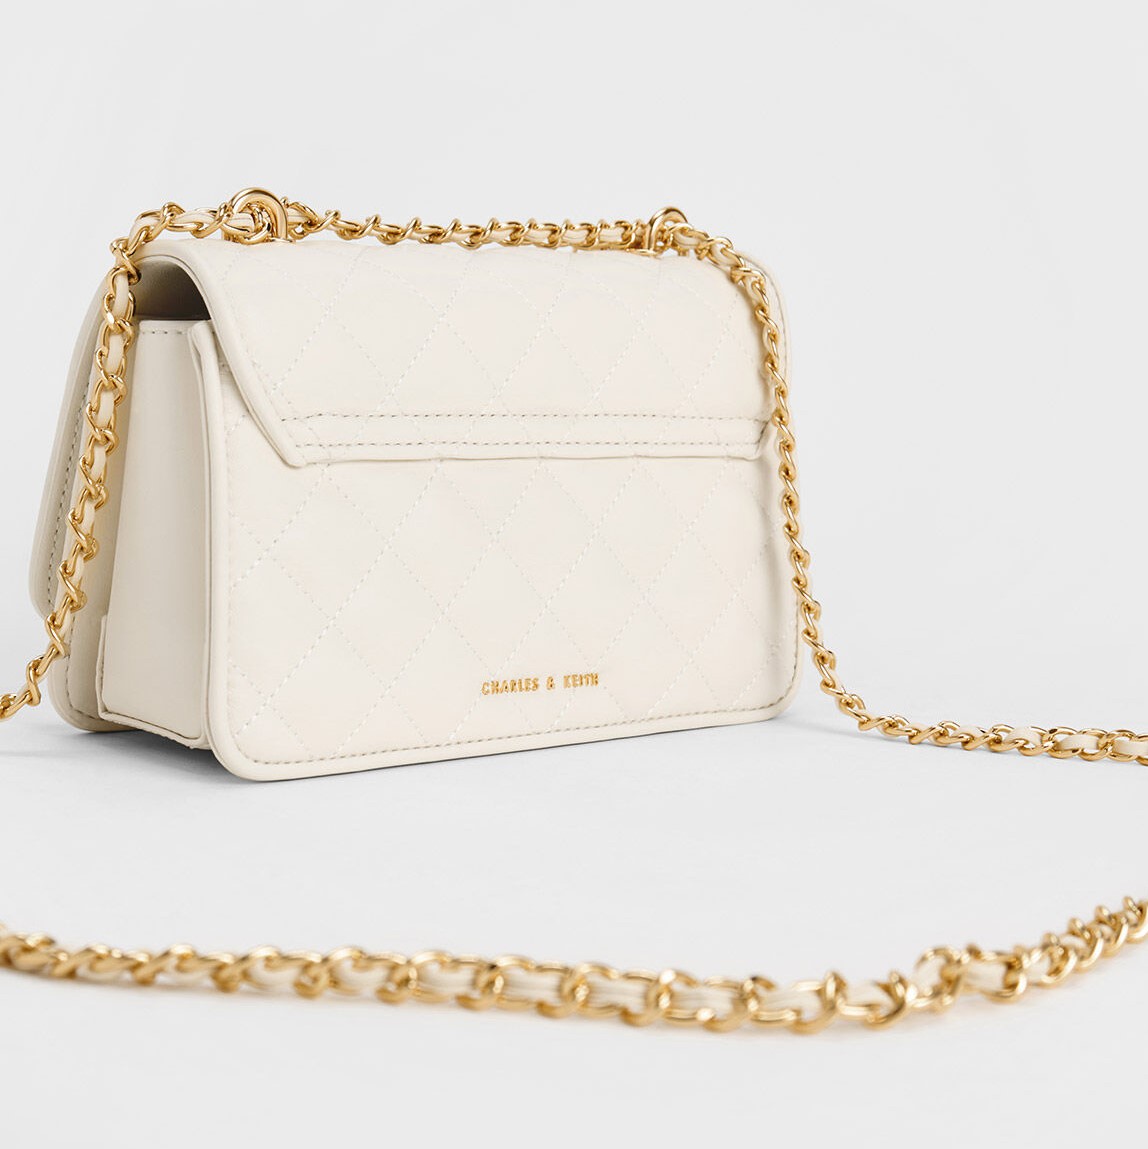 TÚI XÁCH NỮ CHARLES AND KEITH CHARM EMBELLISHED QUILTED CLUTCH 1